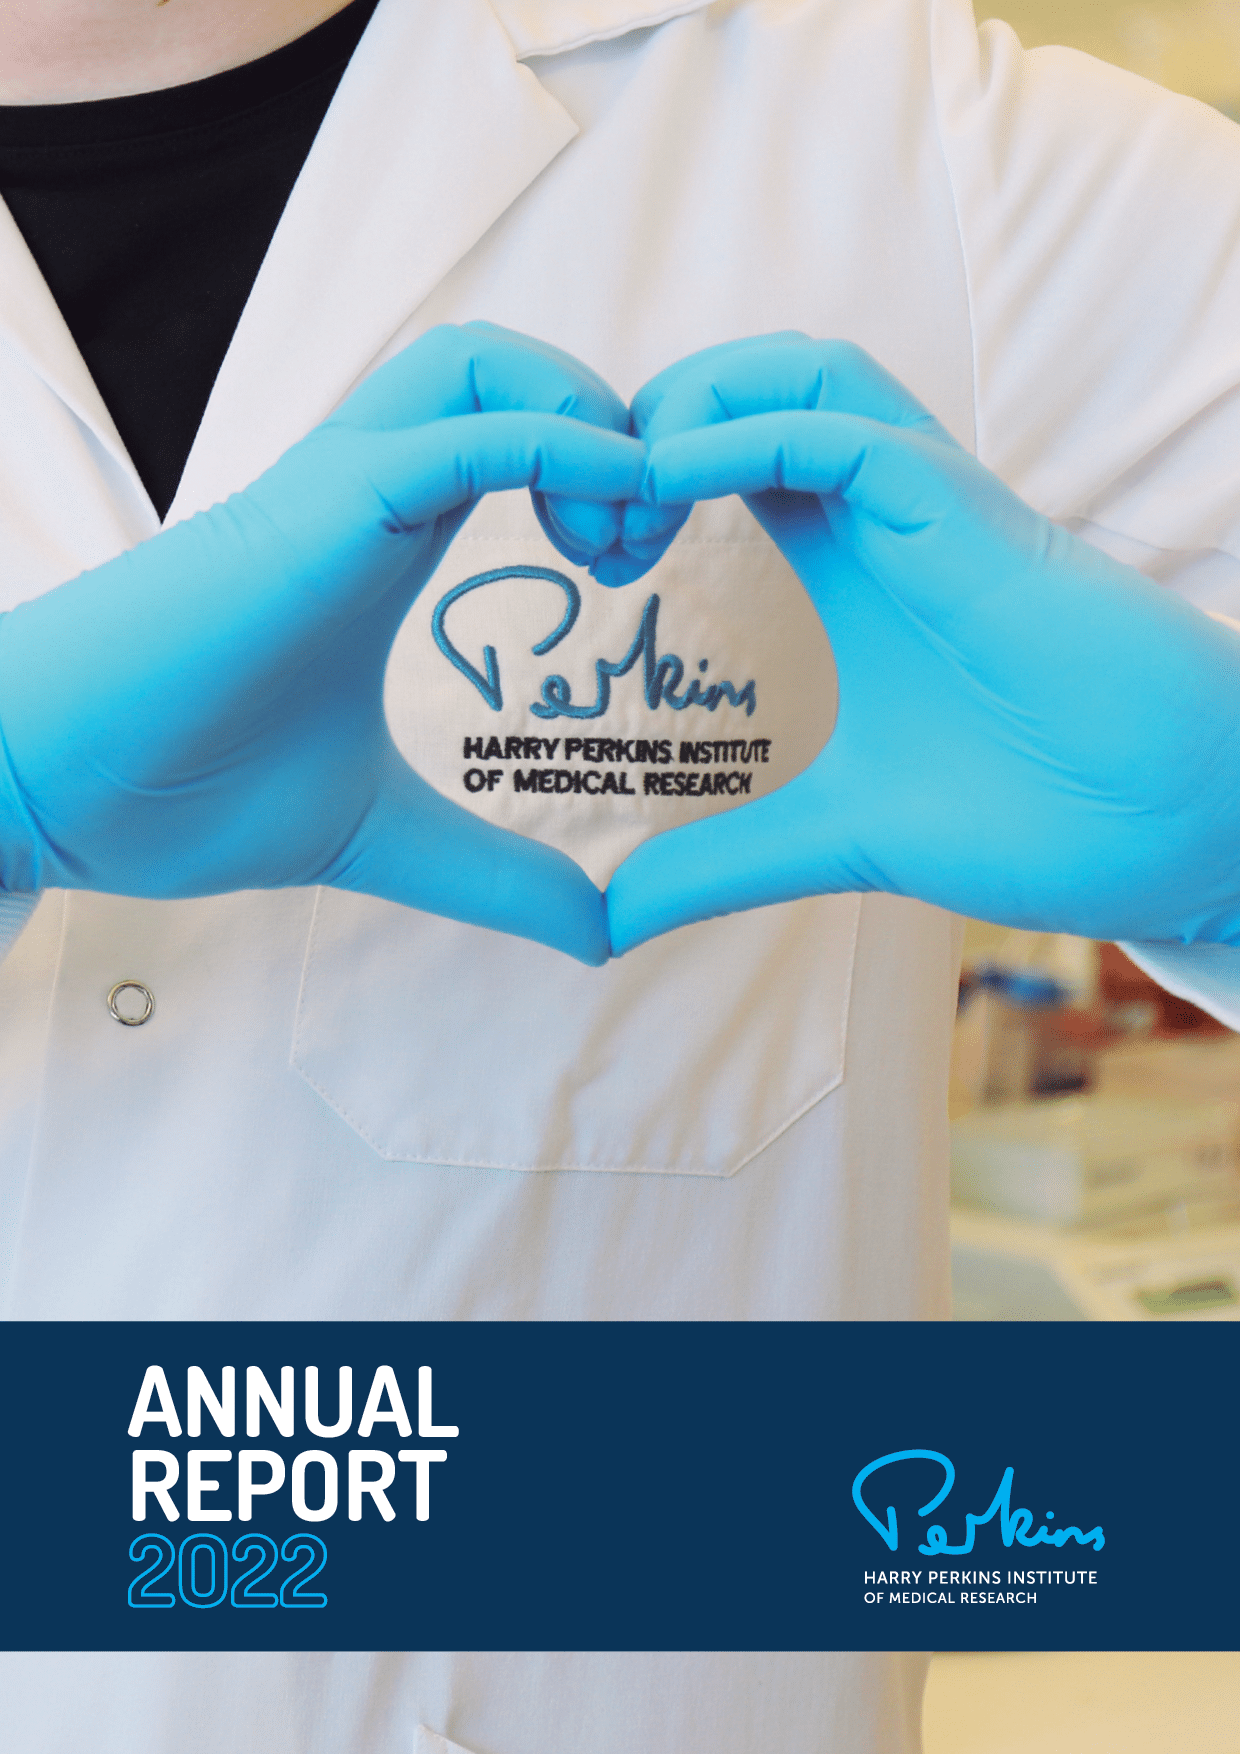 image shows two hands in blue medical gloves in a heart shape around the Harry Perkins Institute of Medical Research logo